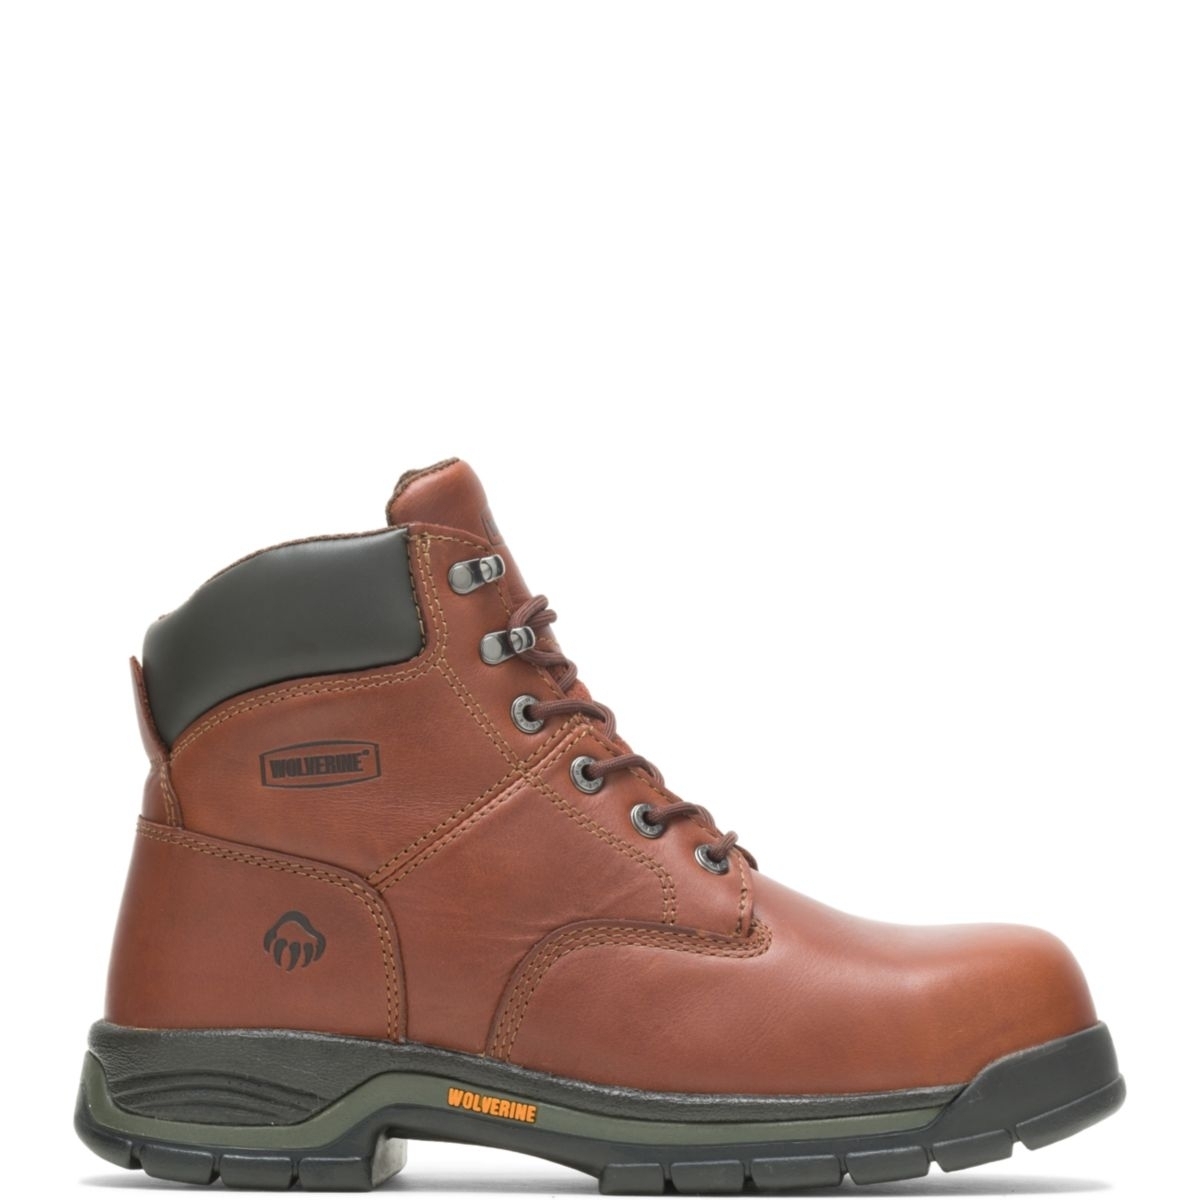 WOLVERINE Men's Harrison 6 Lace-Up Steel Toe Work Boot Brown - W04904 BROWN LEATHER - BROWN LEATHER, 11-M